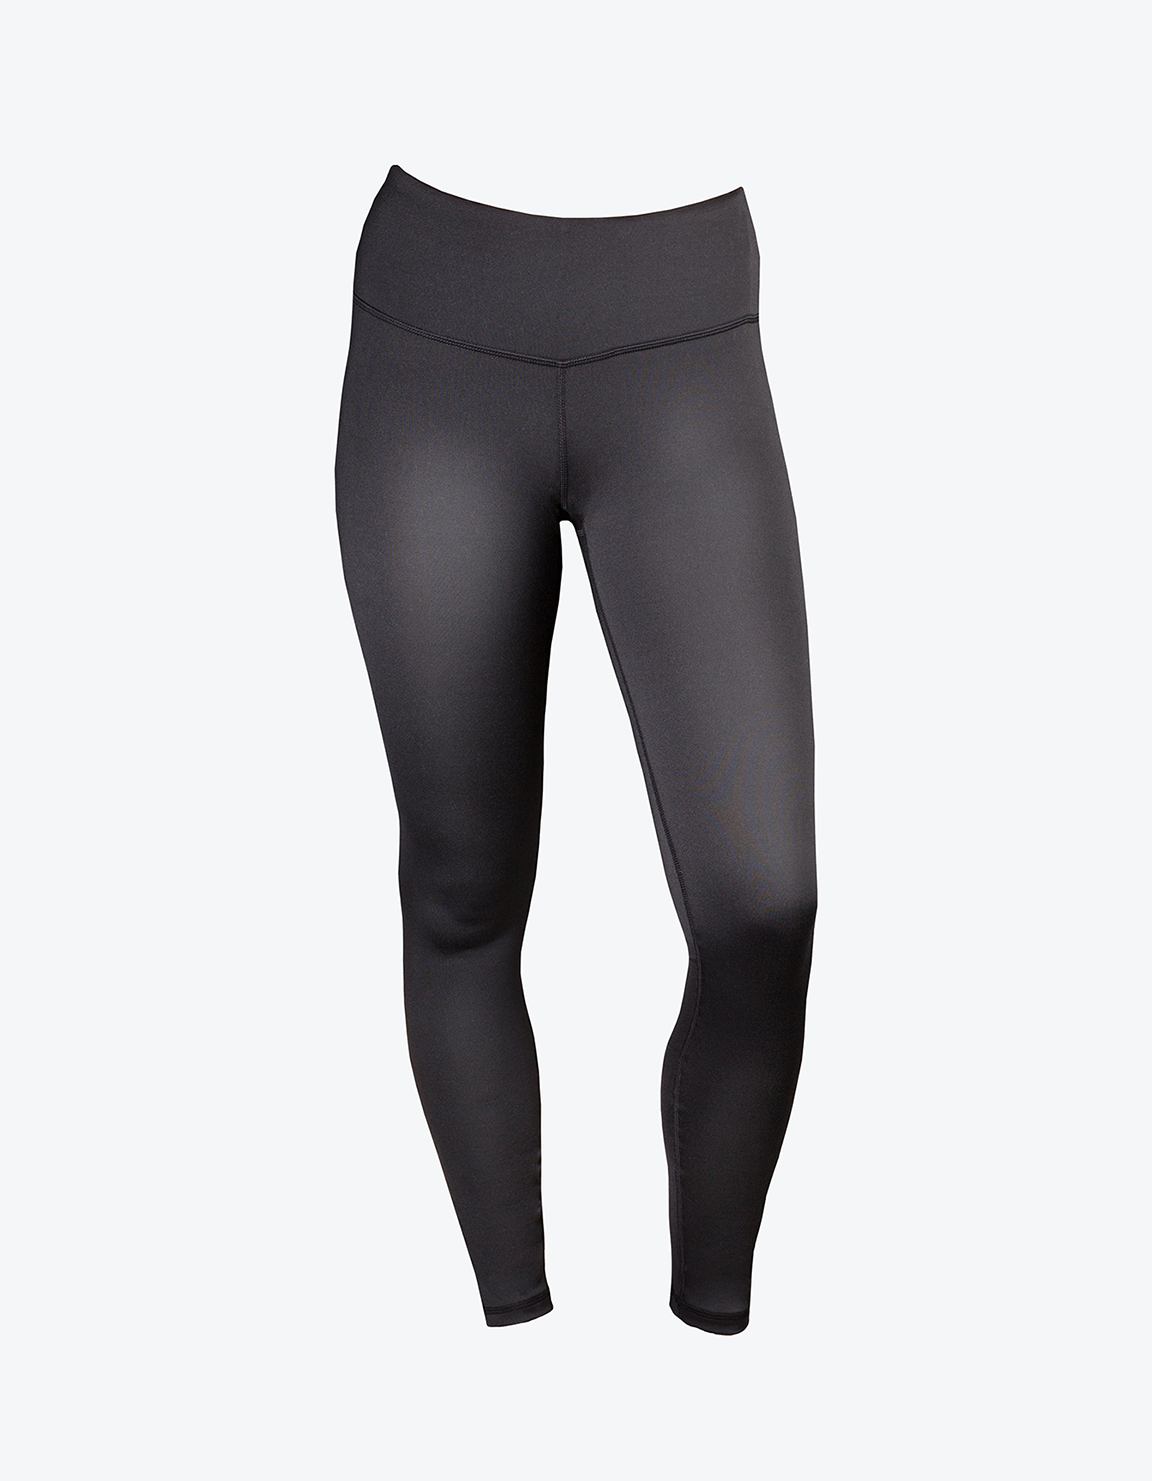 Women's Performance Legging by LAIRD 